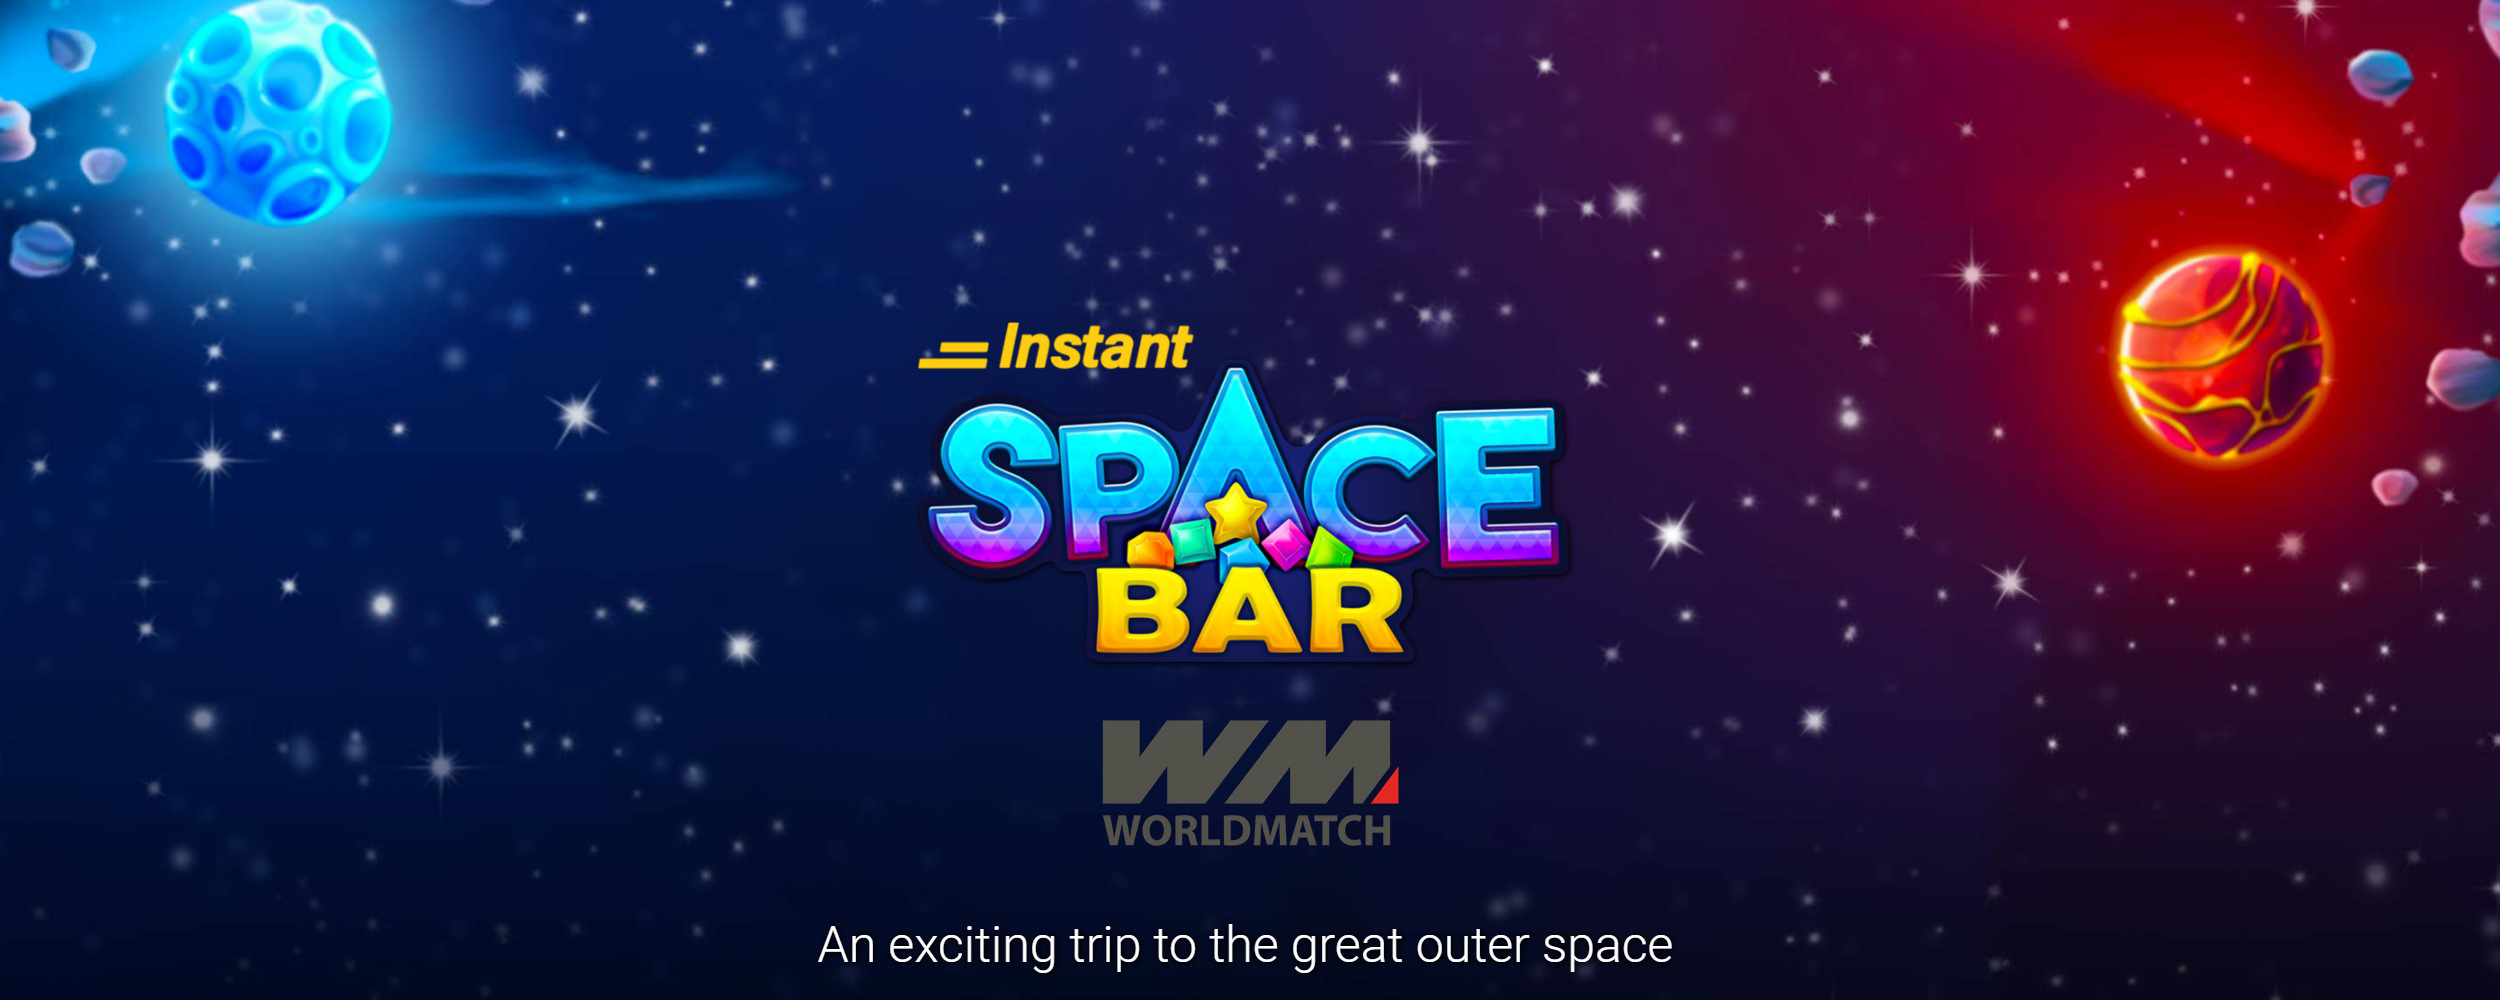 Instant Space Bar by World Match